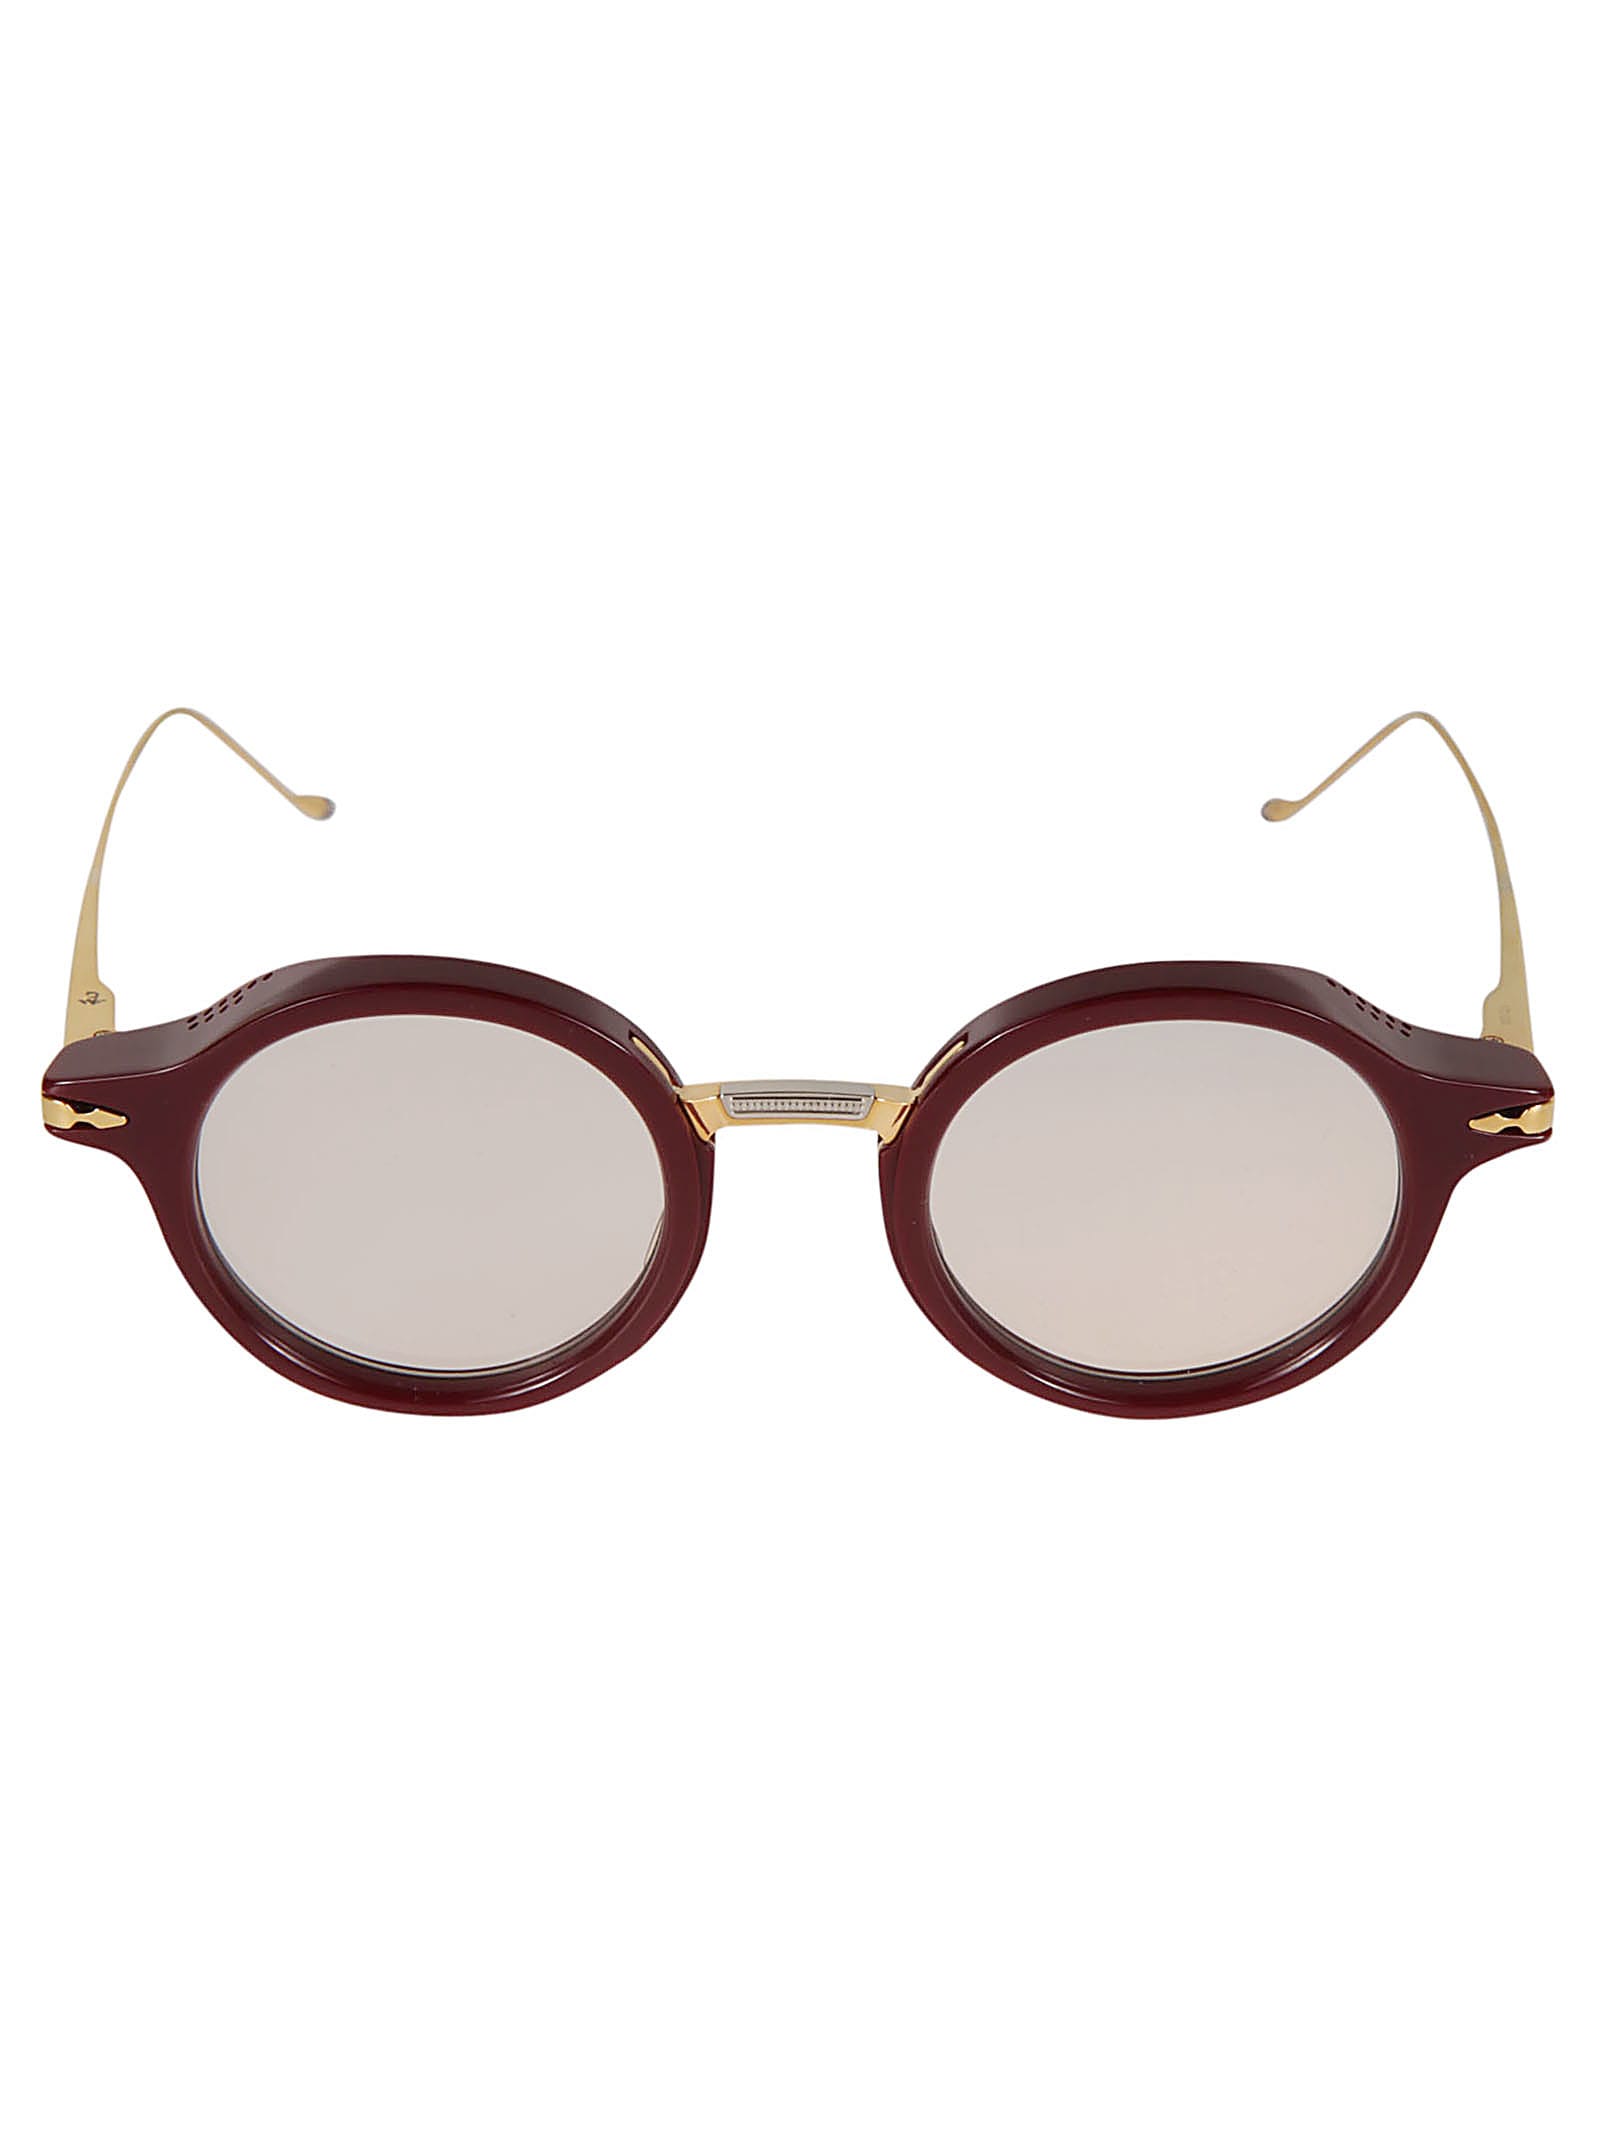 Jacques Marie Mage Norman Frame In Brown